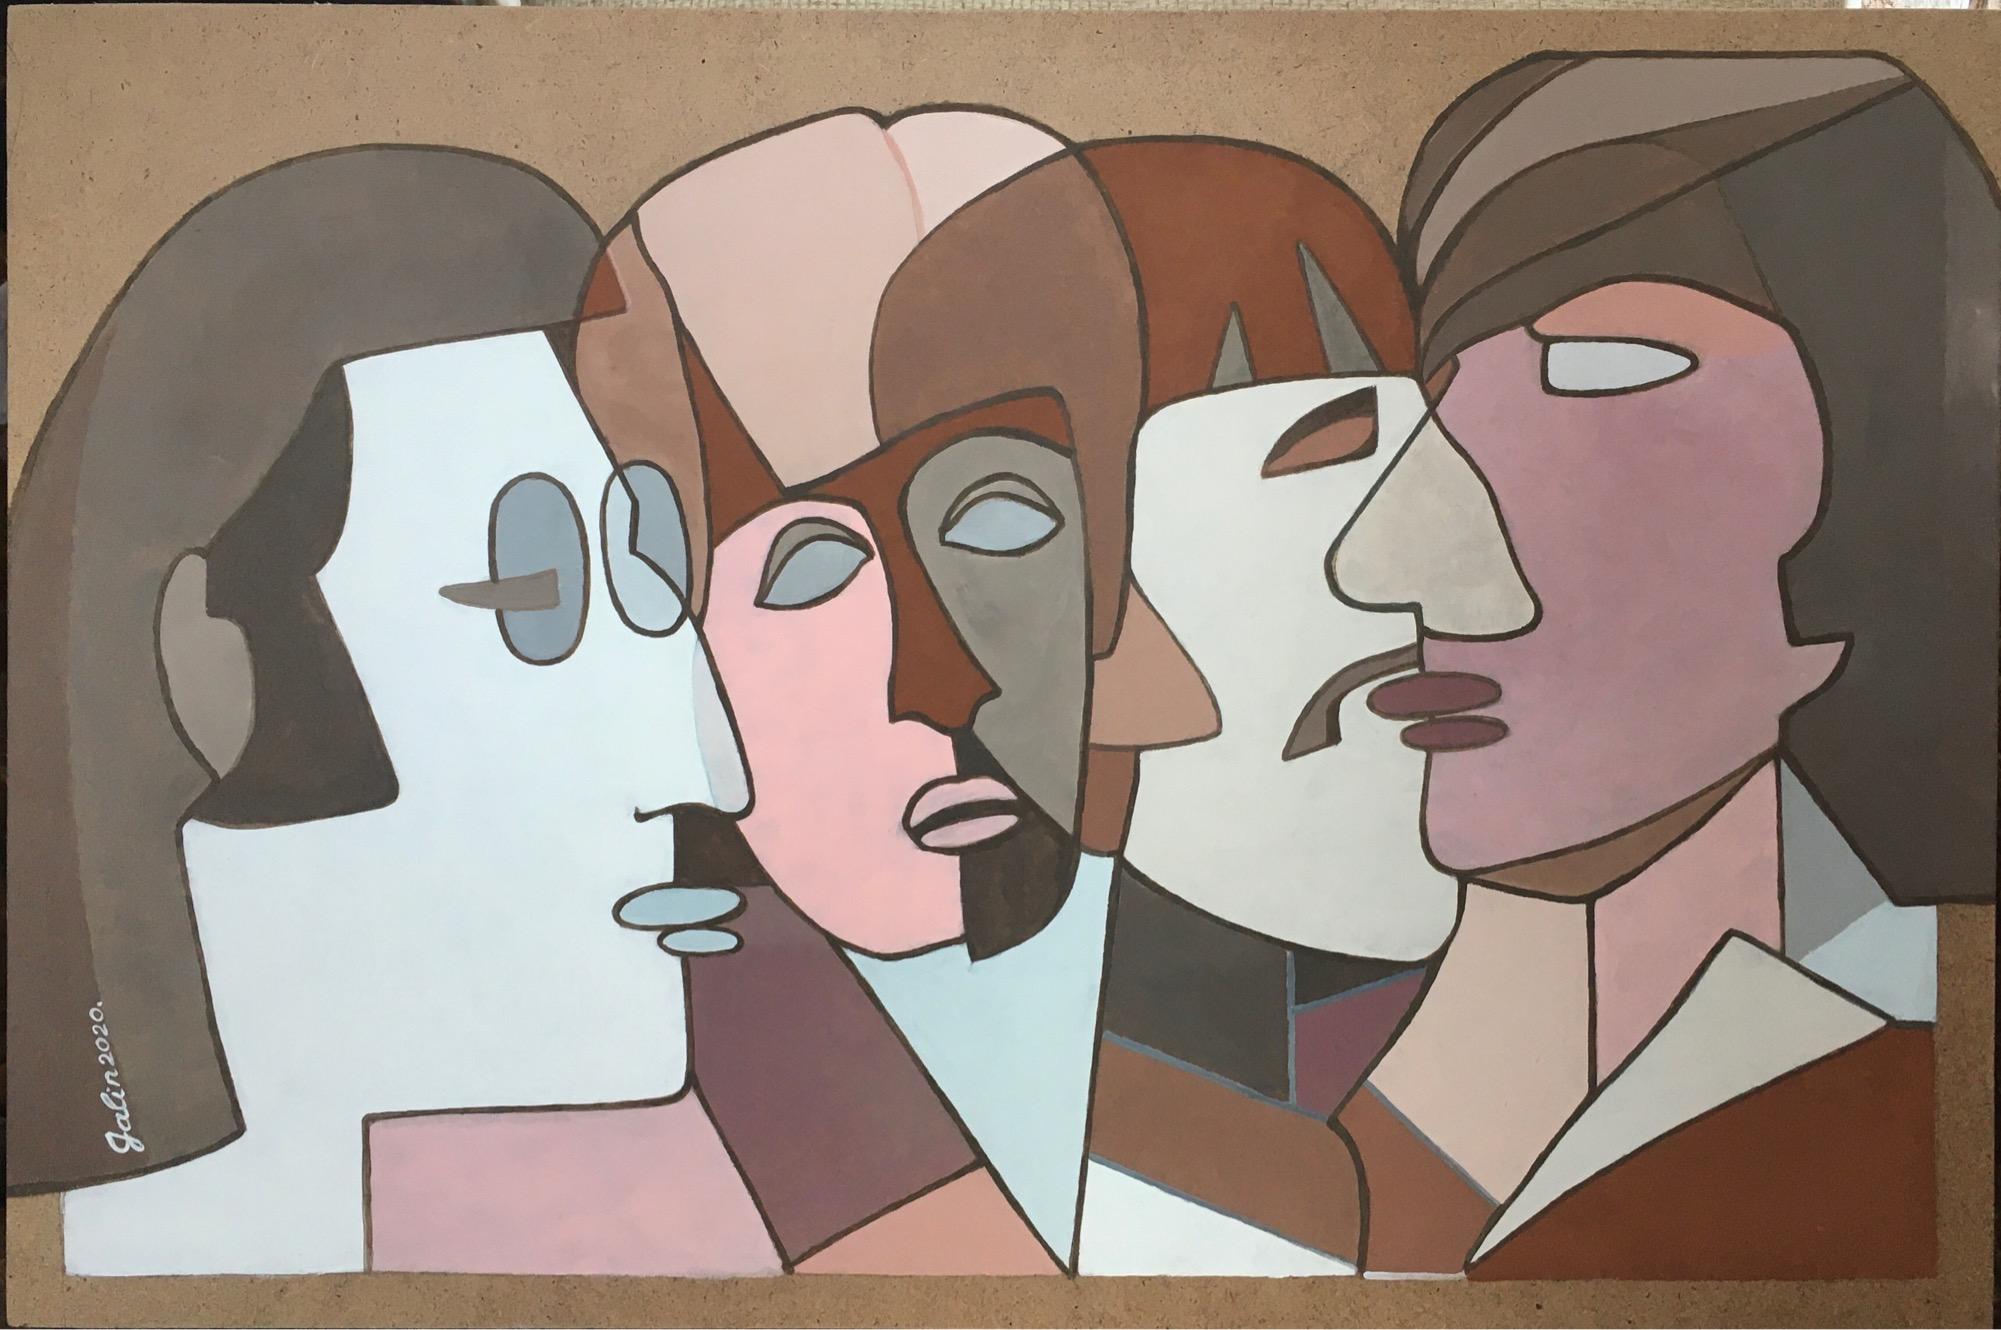 The Beatles - abstract painting, made in pink, brown, beige, grey, white color